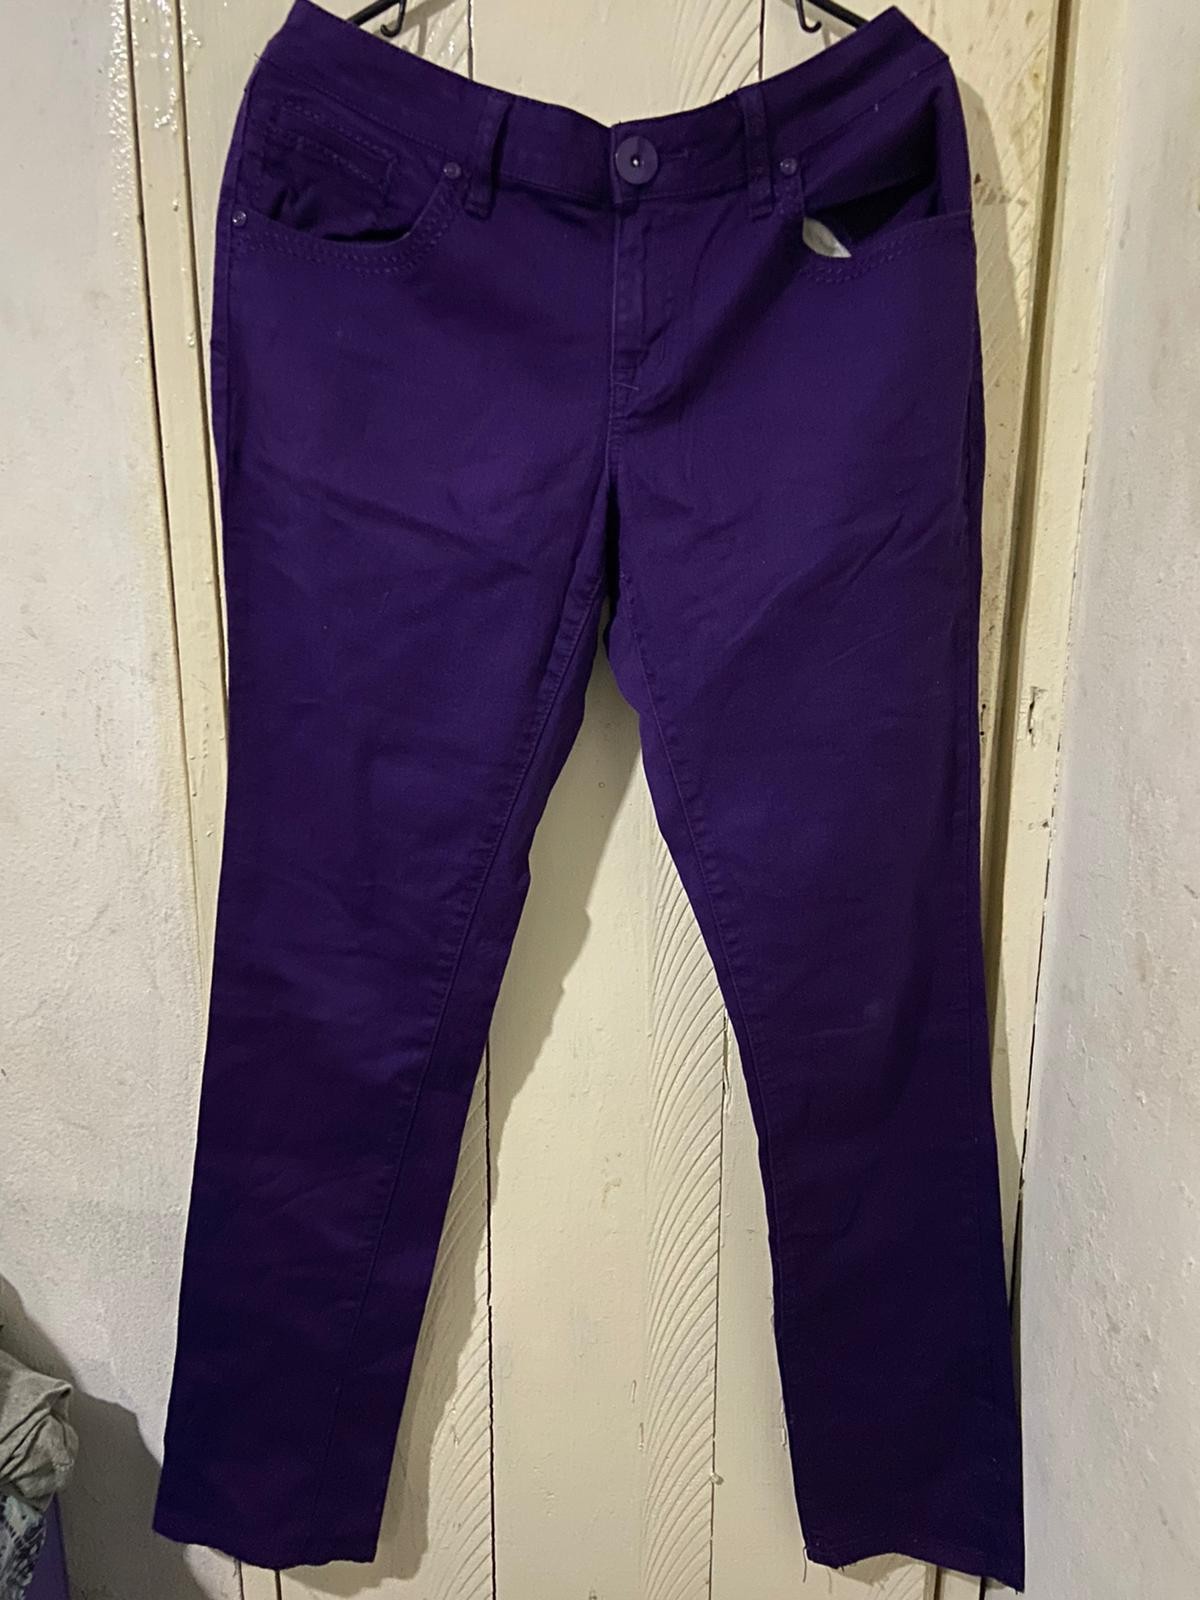 For Sale: Purple Jeans Pants With Zip Back Pockets Size 15 - Old Harbour